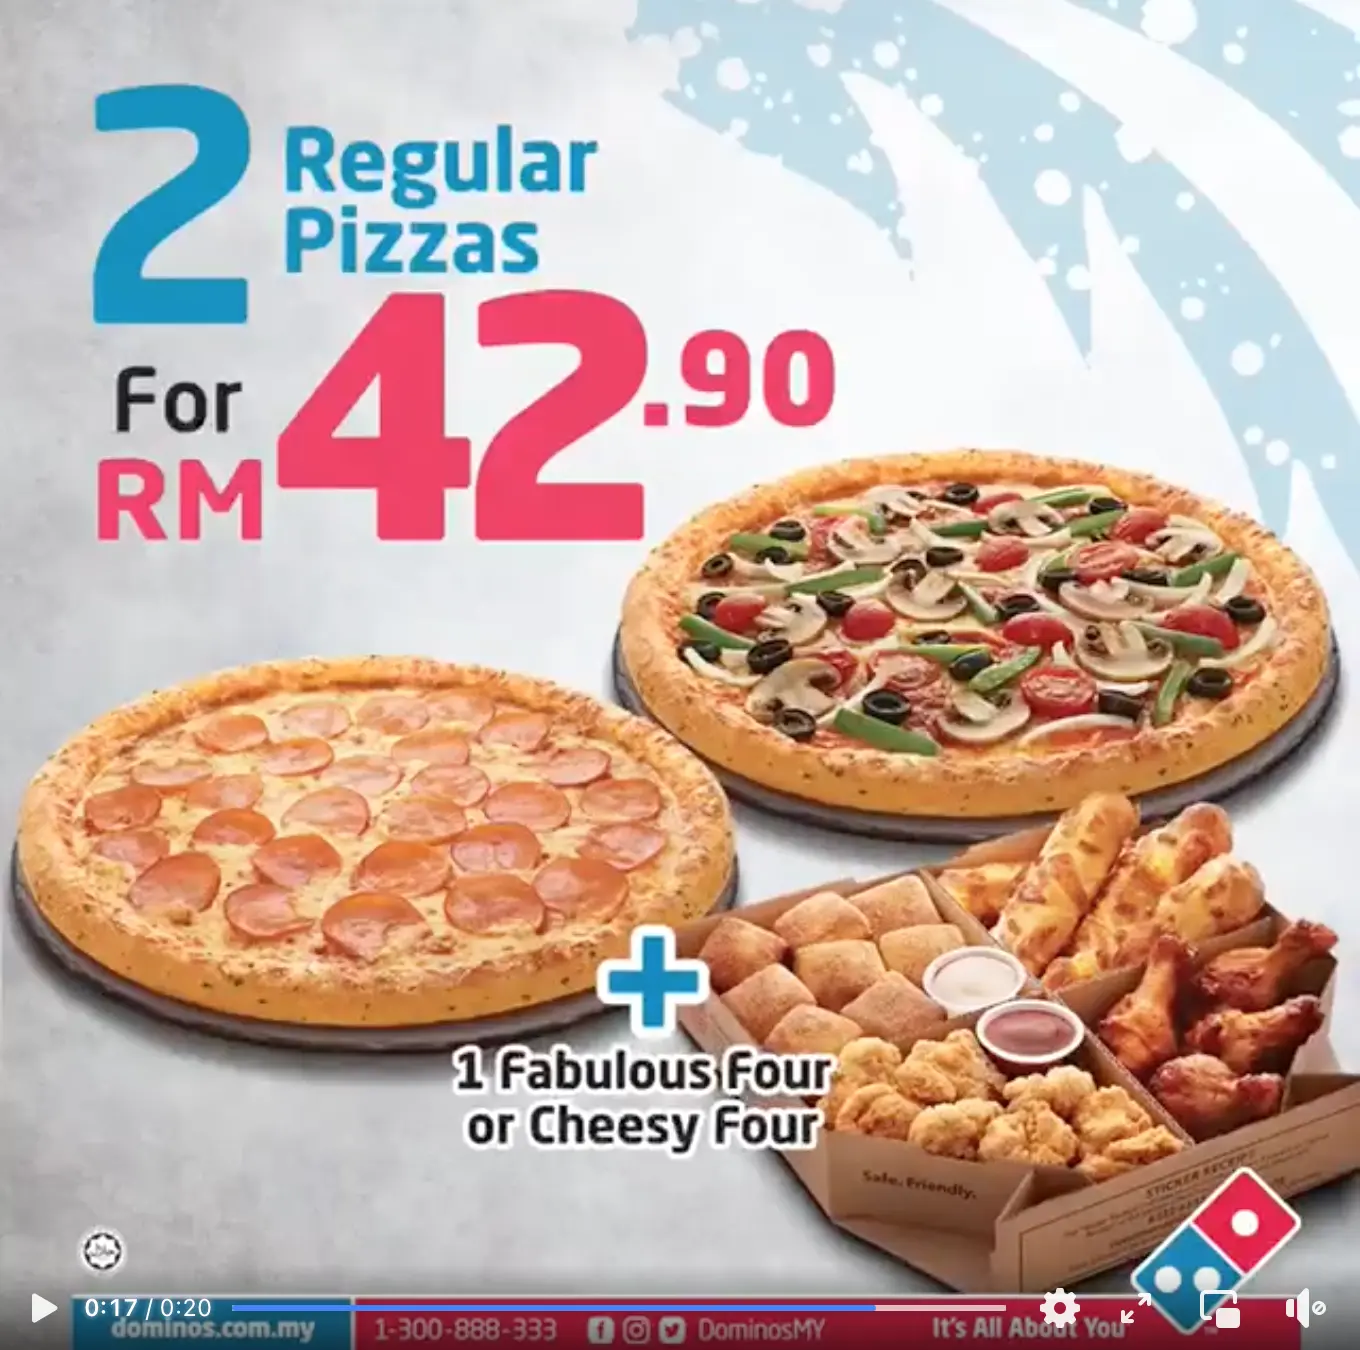 Dominos vaccination offer